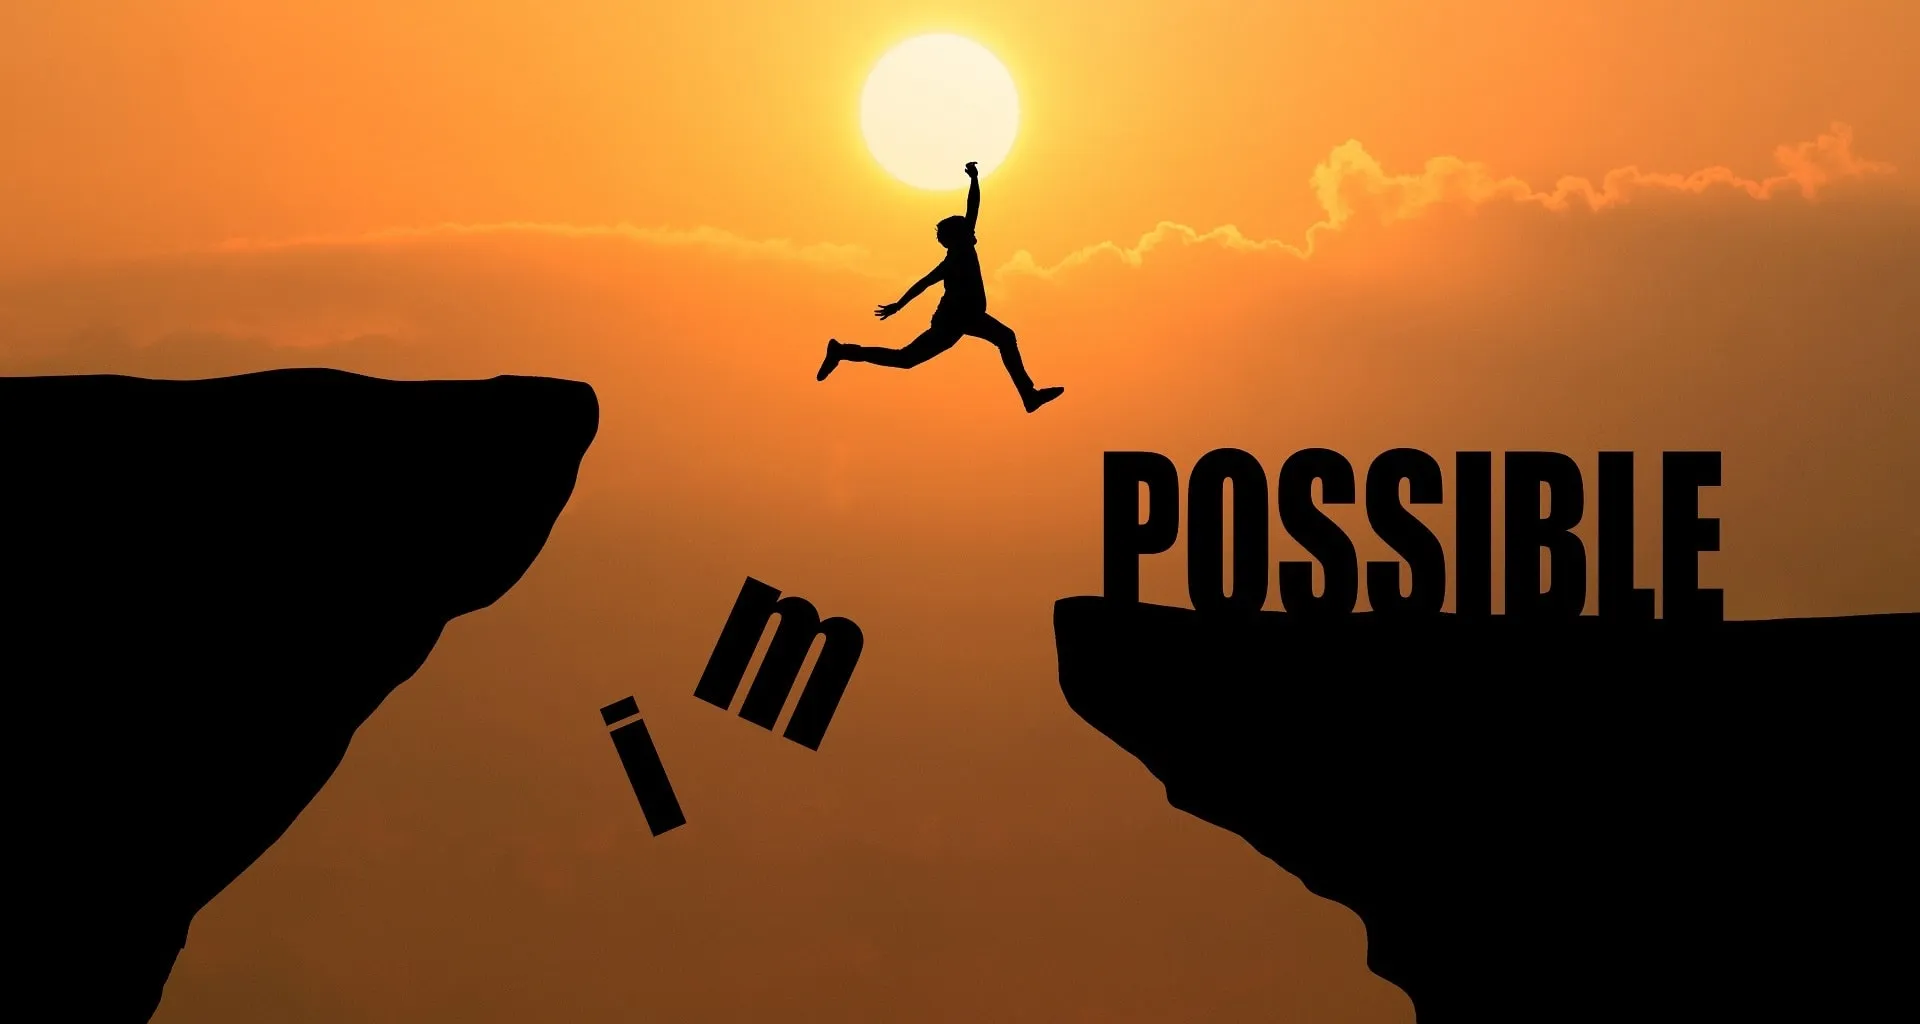 A person is jumping from one cliff to another, with the setting sun in the background. The word "IMPOSSIBLE" is split, with "IM" falling away and "POSSIBLE" remaining, symbolizing that the impossible is possible.